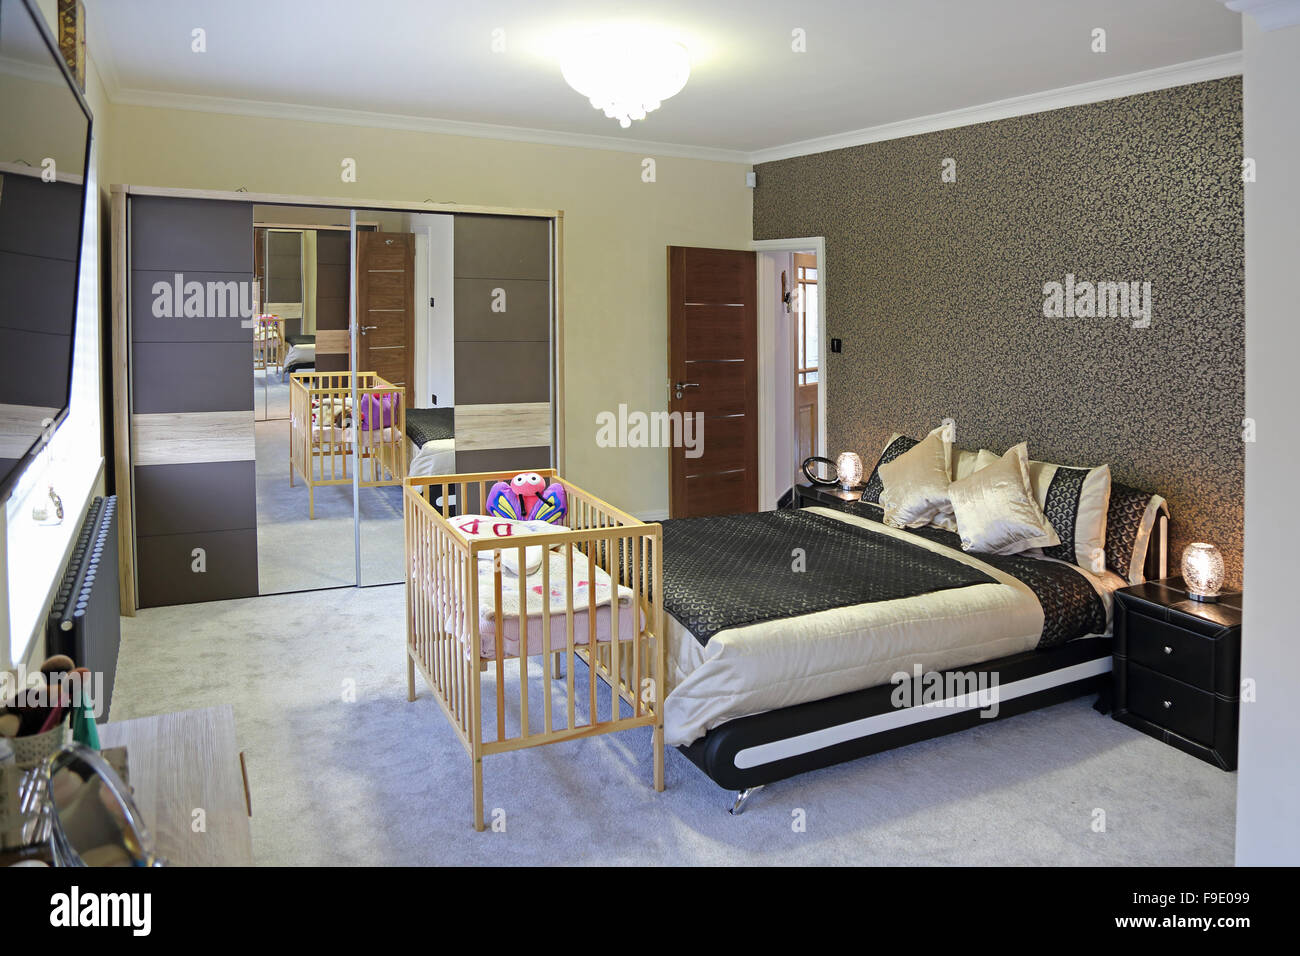 A newly decorated modern bedroom with a double bed and a baby's cot contrasting with the trendy furniture Stock Photo